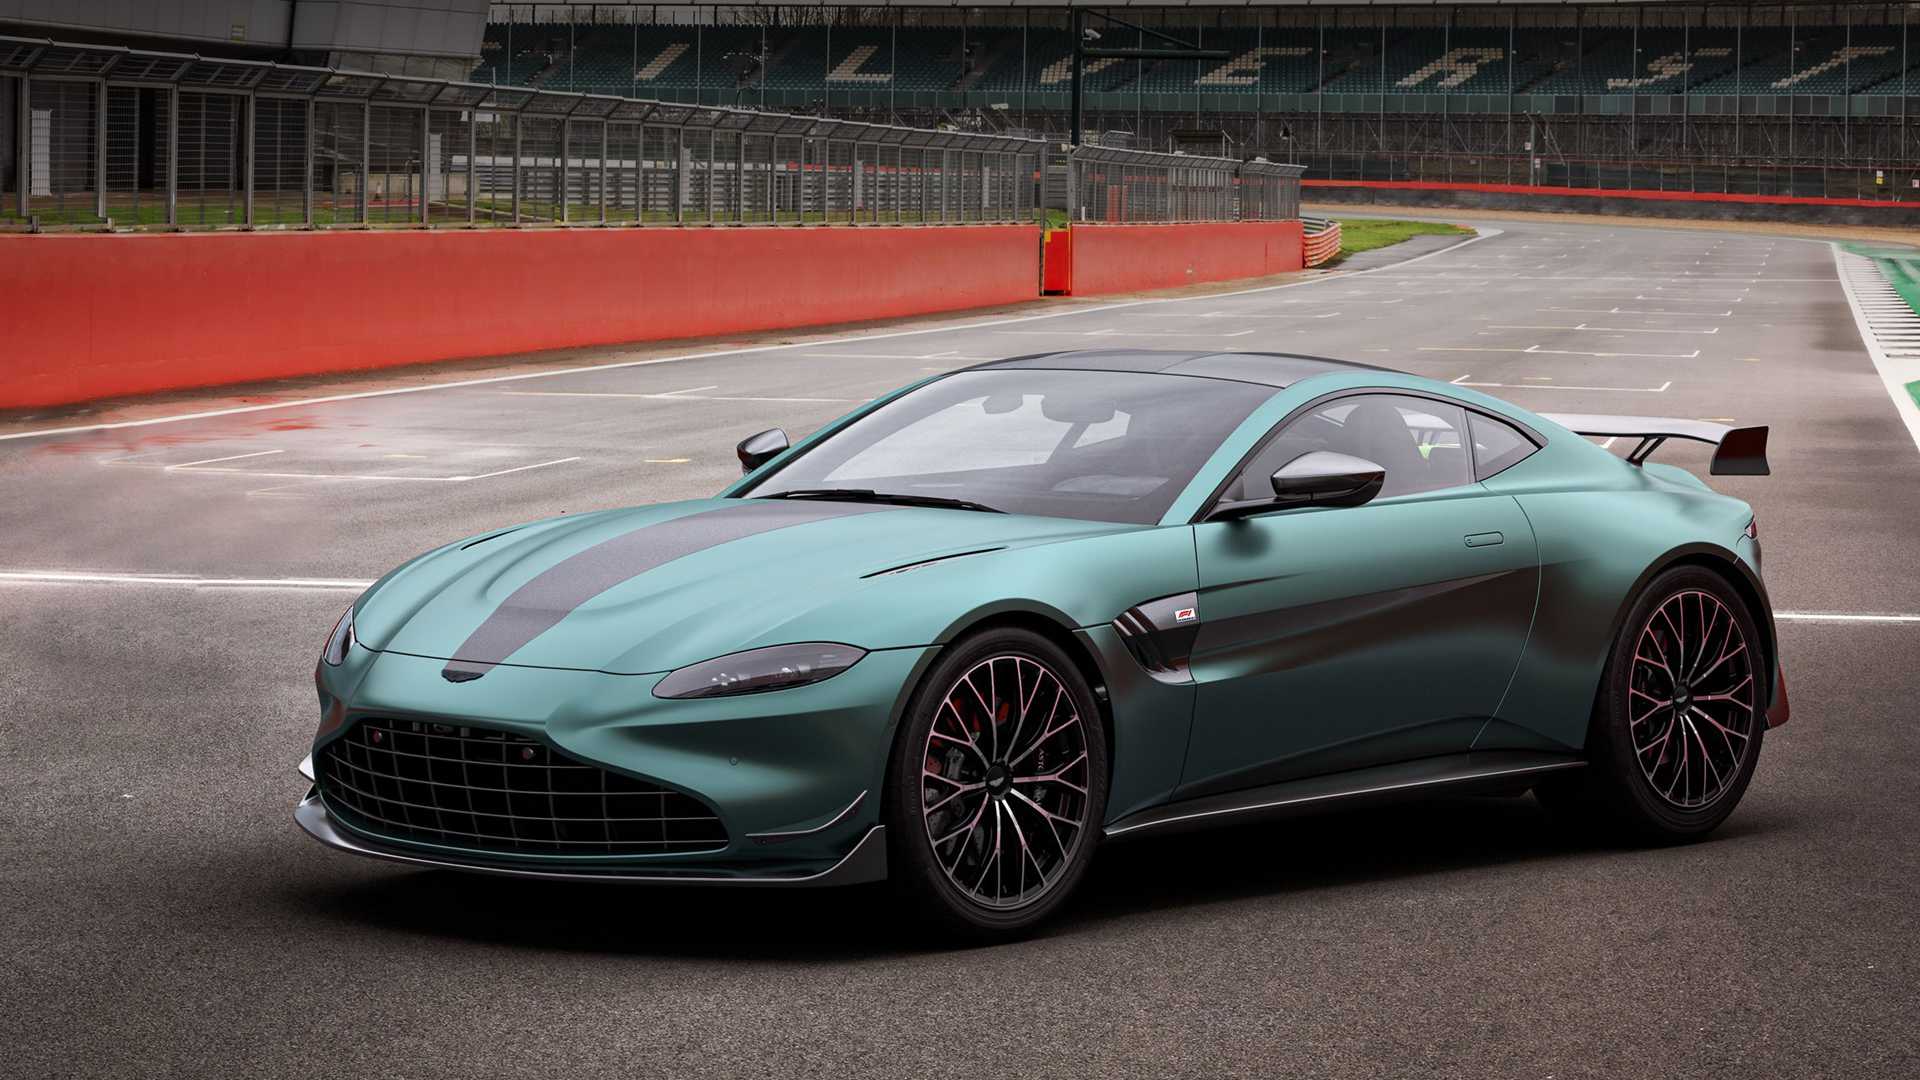 A New Chapter Begins for the Aston Martin Vantage